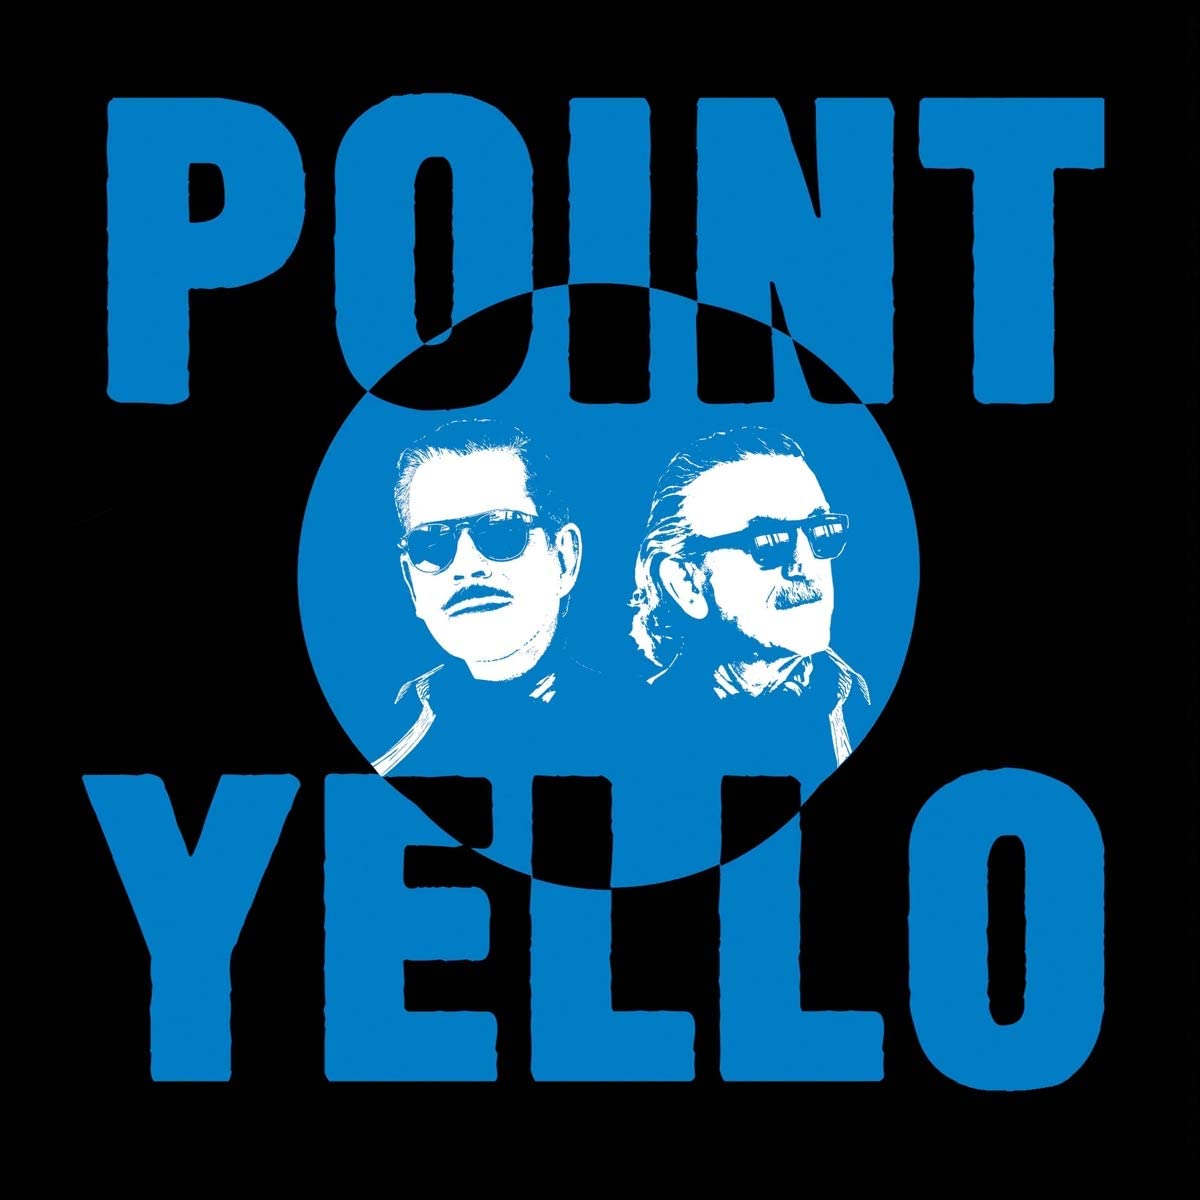 7. Point - Yello.Prior to last year,I didn't really know of this mysterious electronic band from Switzerland. But upon enjoying this album,I properly checked out their back catalogue & I'm glad I did. Best tracks:Out Of SightSpinning My MindWaba DubaArthur Spark